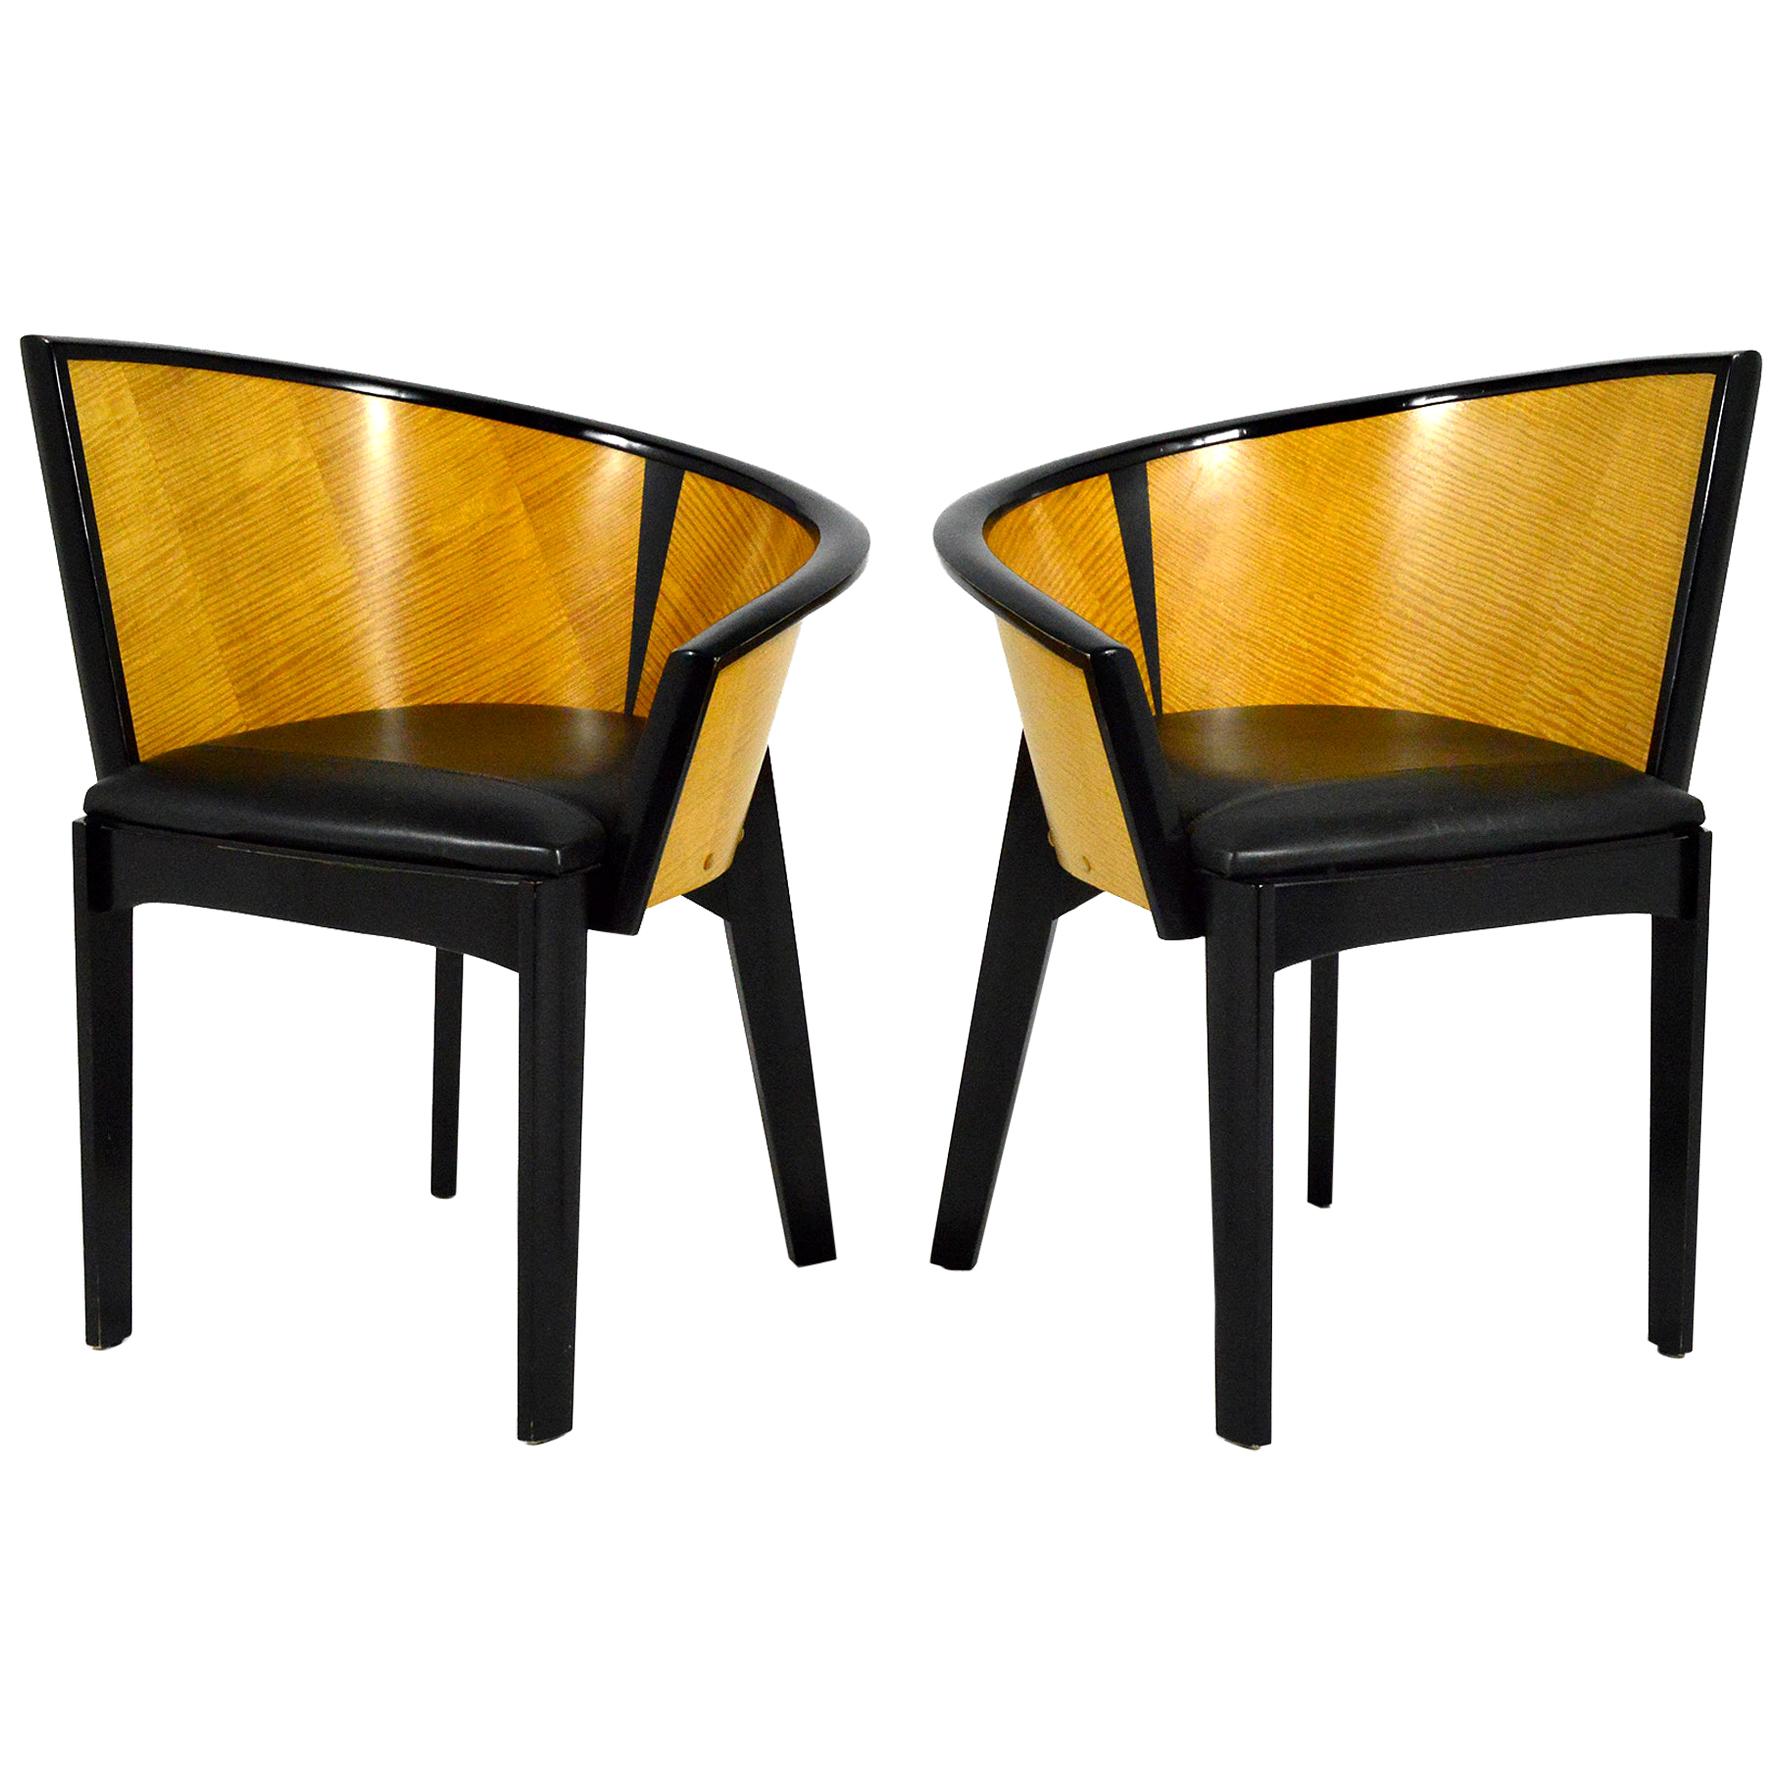 Paul Haigh Sinistra Chairs by Bernhardt For Sale